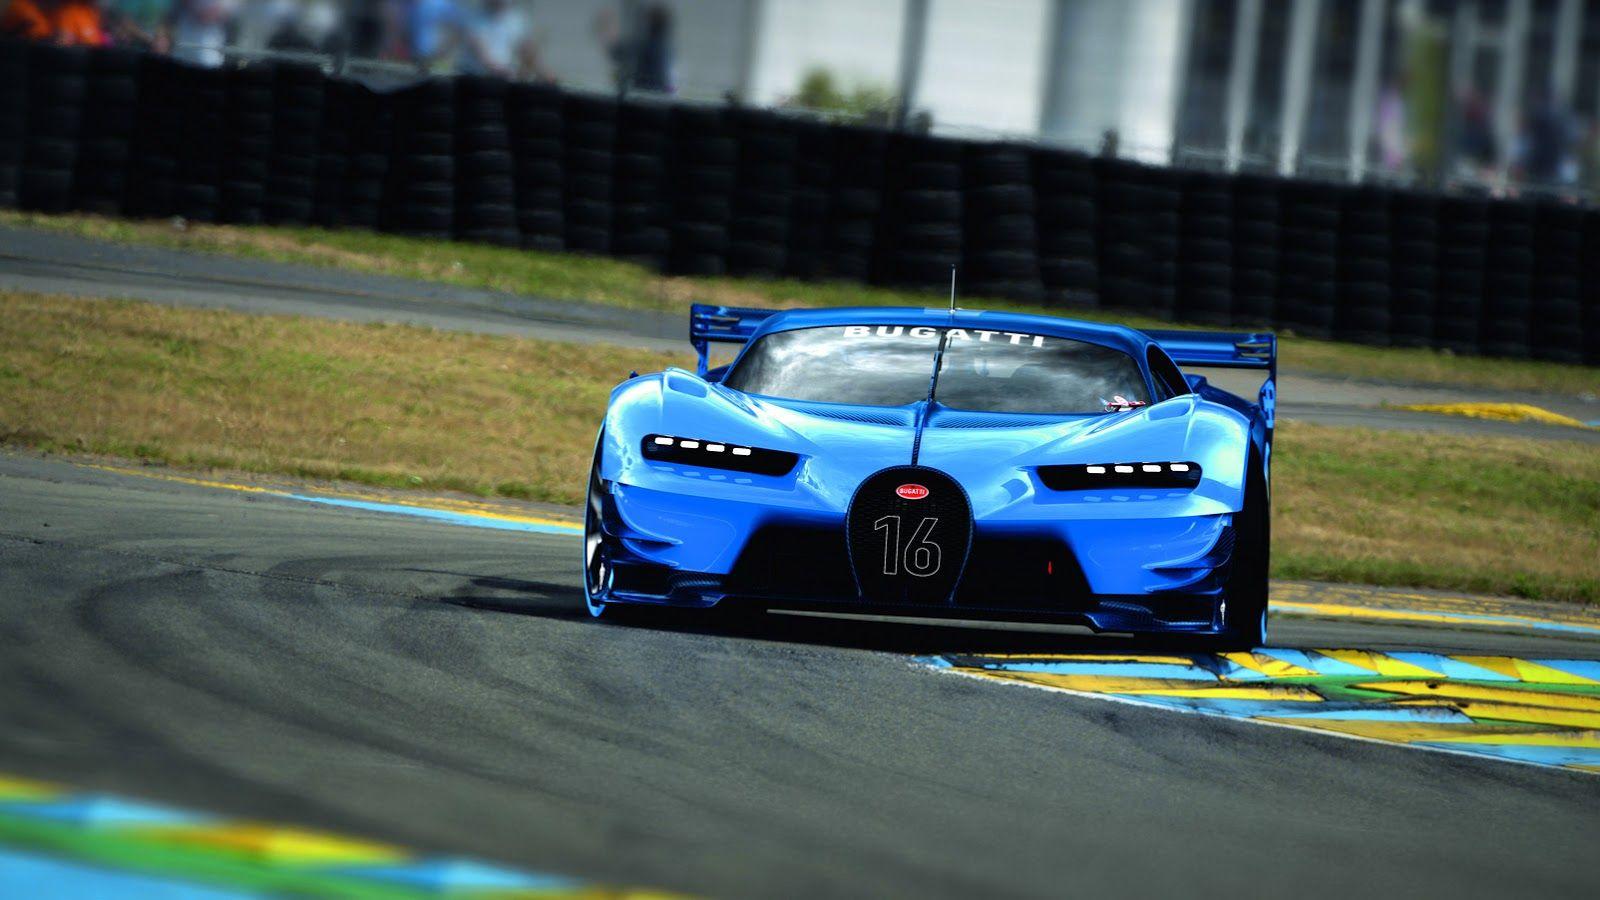 Bugatti Chiron Gt Best Image Gallery 14 And Download